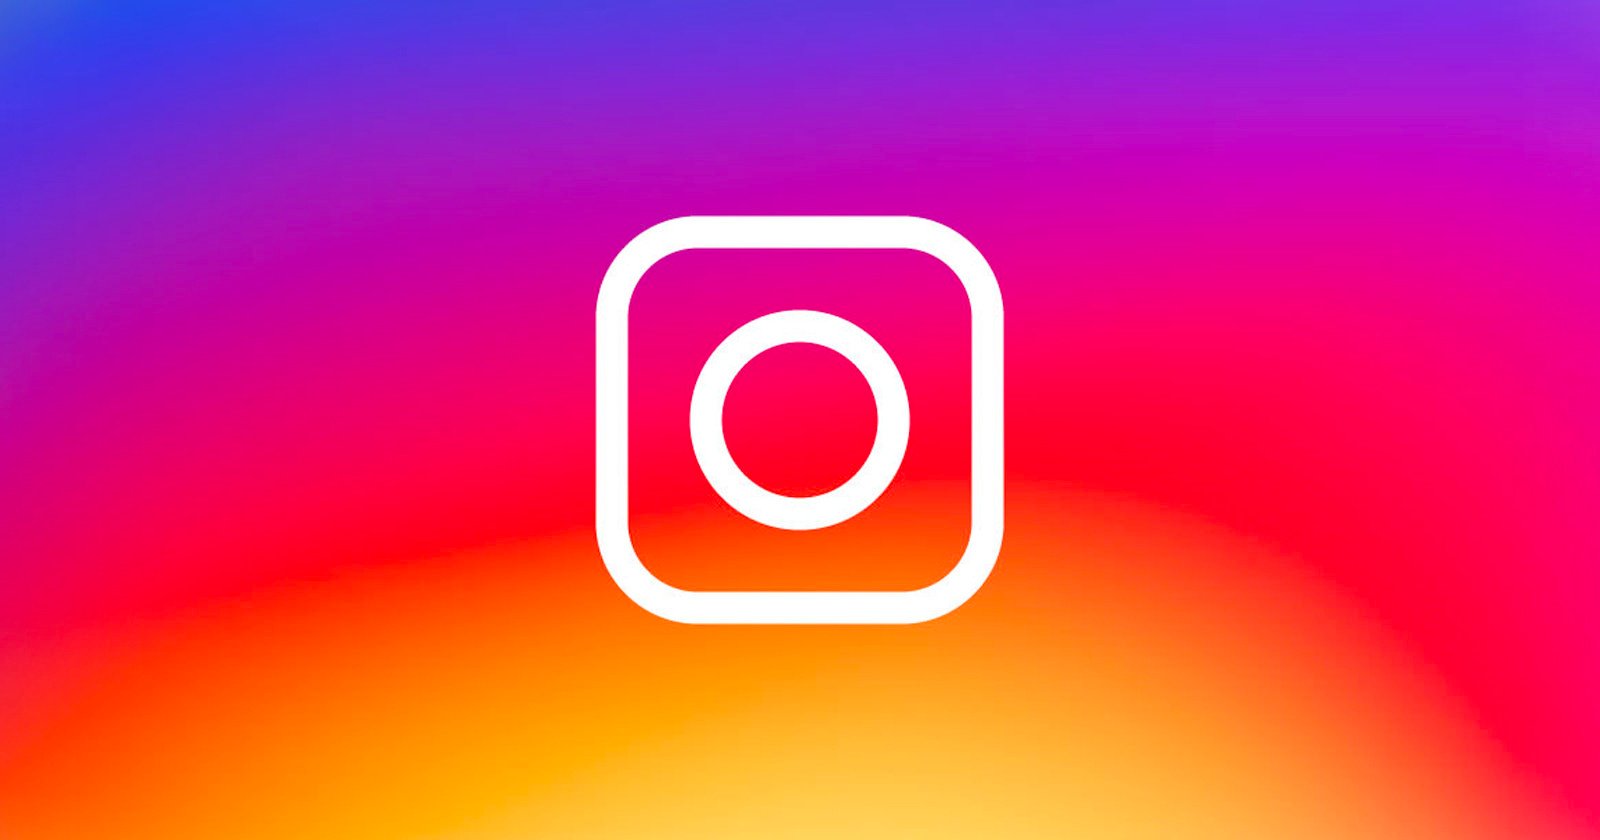  instagram outage telling users their accounts have been 